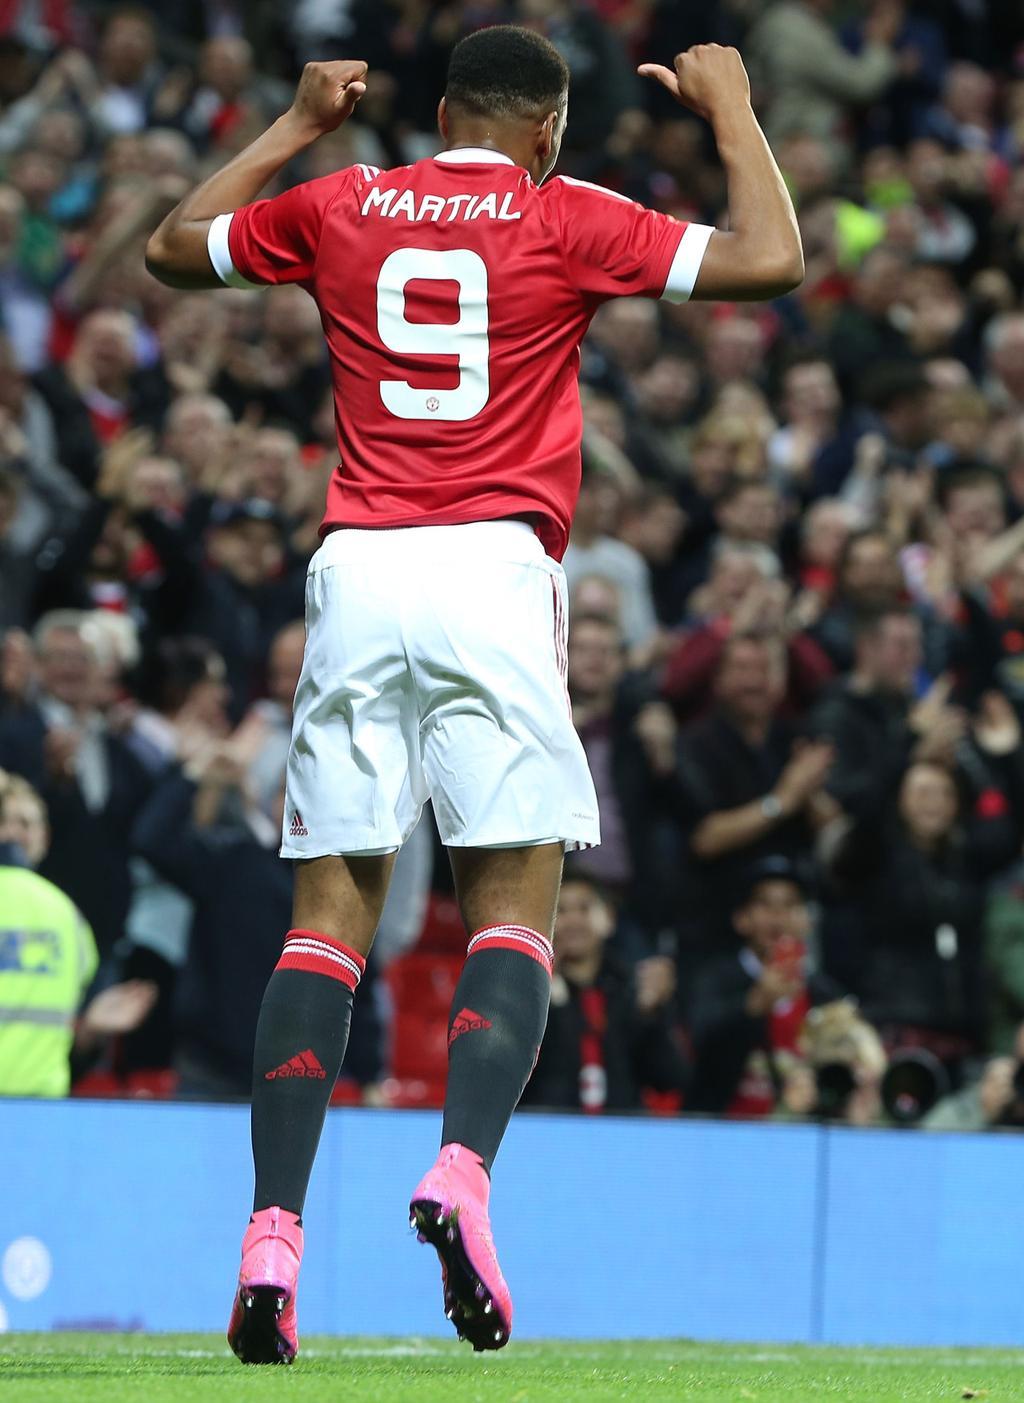 Best image about Anthony Martial. Official